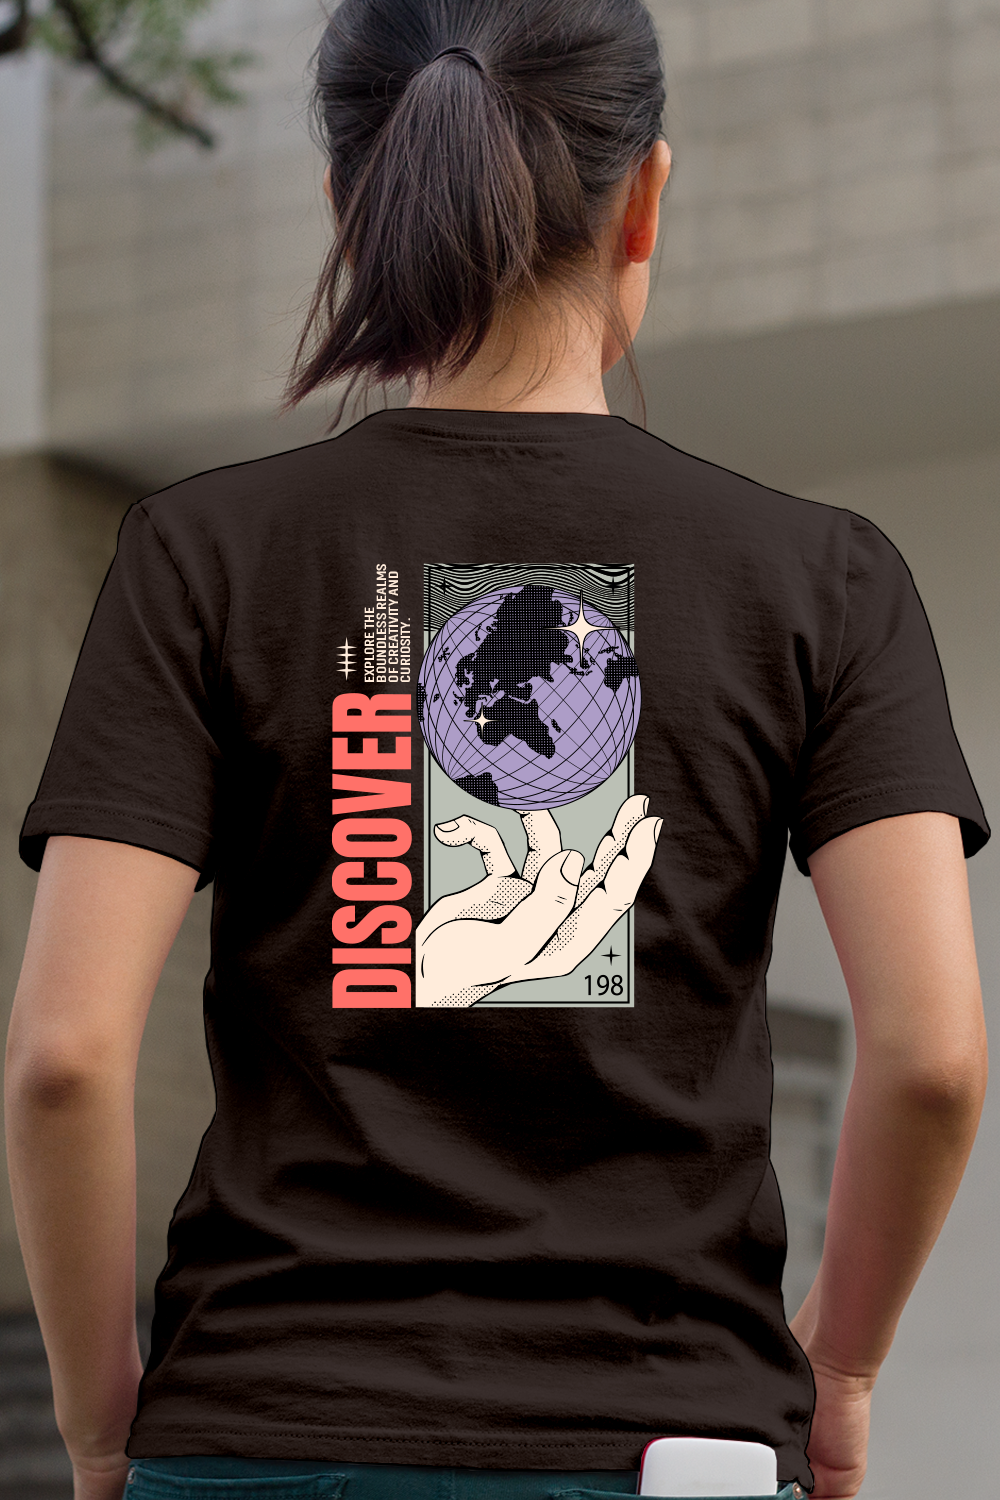 Discover Charcoal Grey Unisex T-shirt